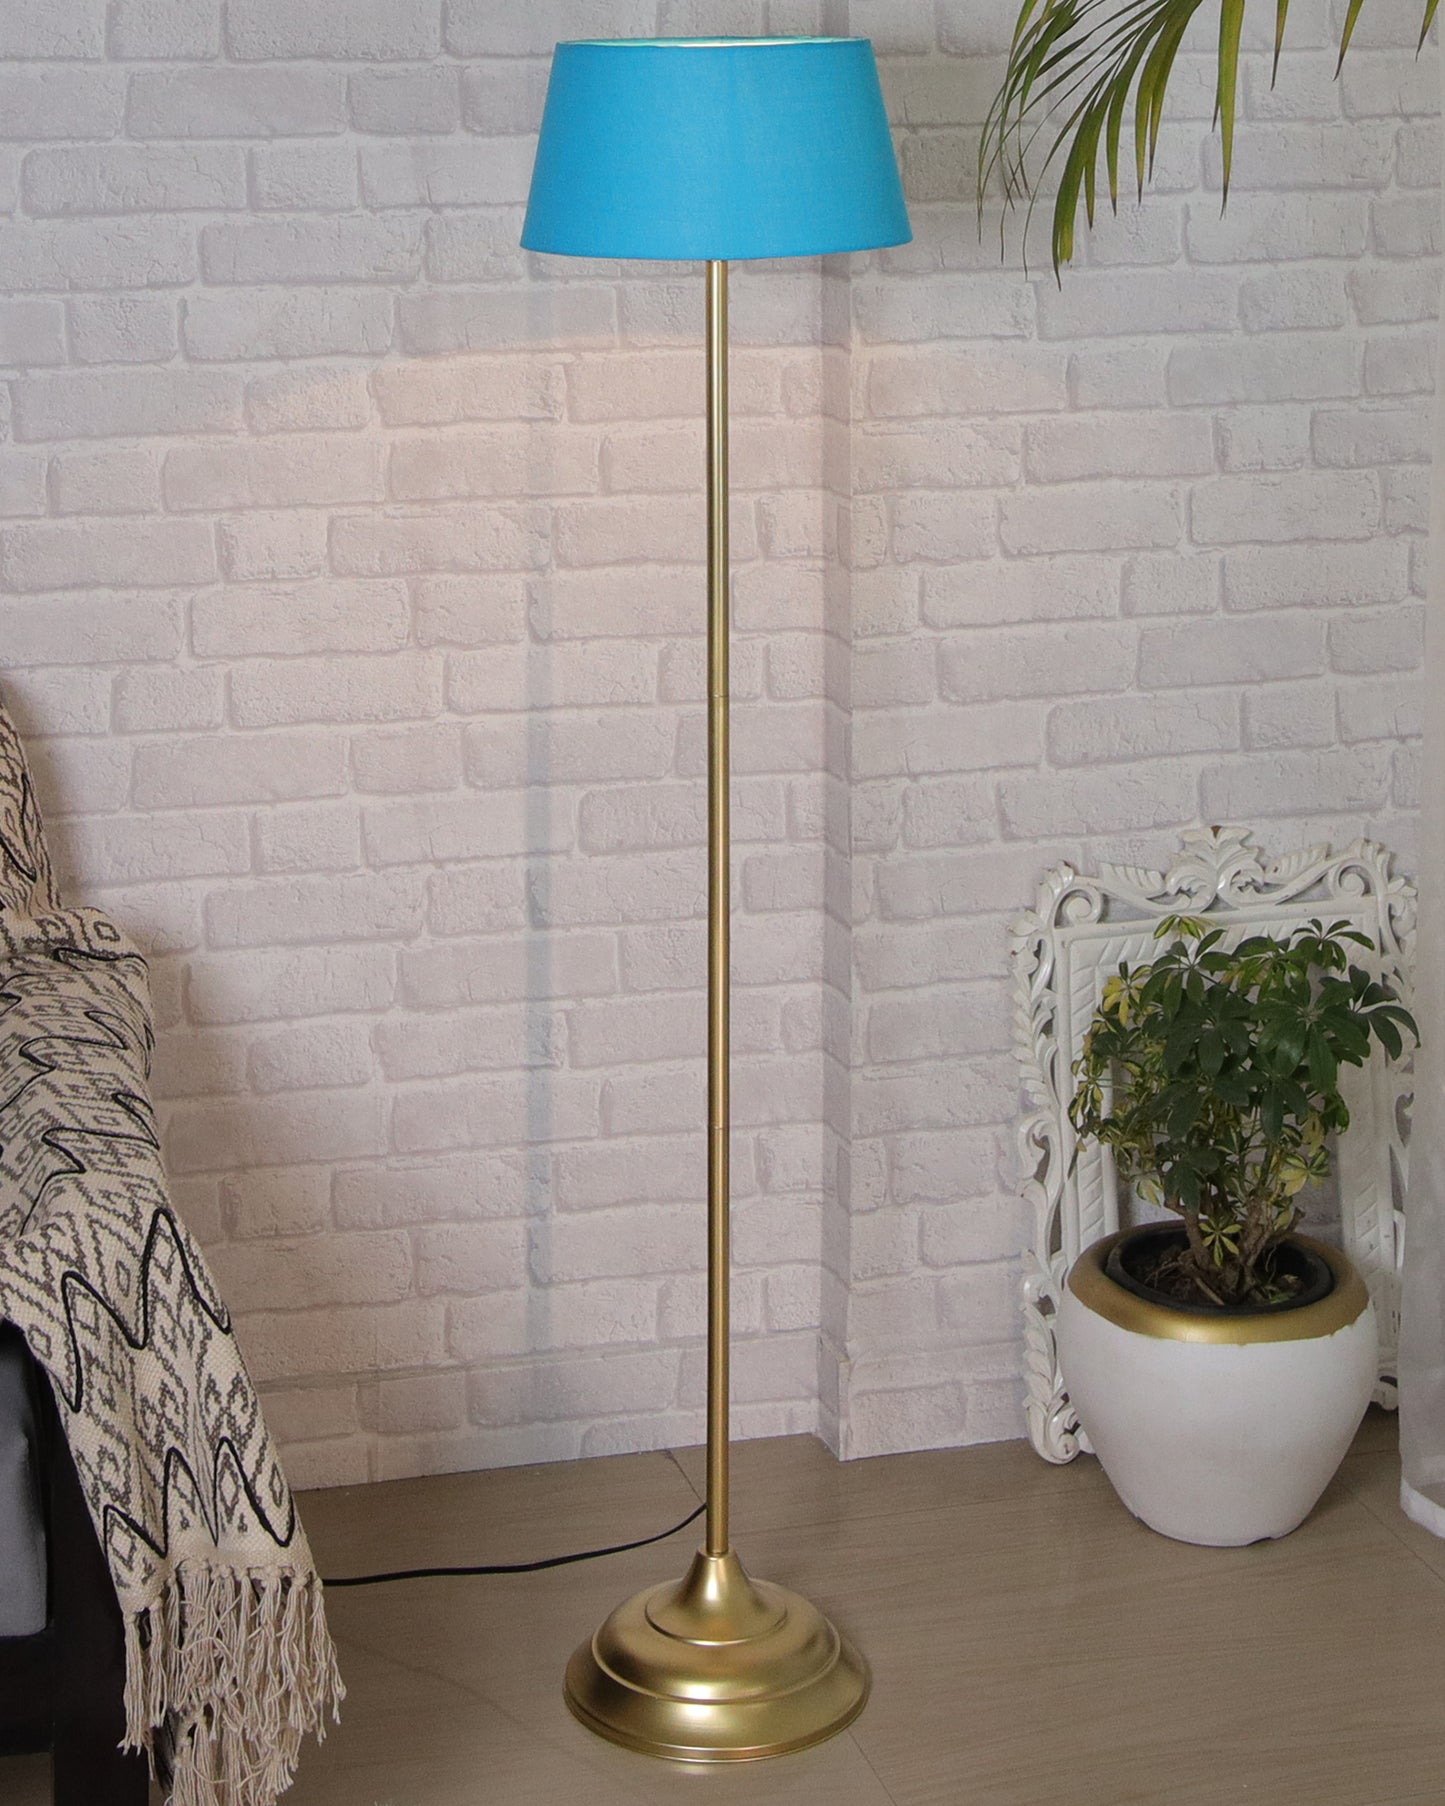 Contemporary Metal Floor Lamp,Contemporary Minimalist Standing Floor Light with Iron Legs, E27 Lamp Base, Modern Design Standing Light for Living Room,Bedroom,Antique Gold